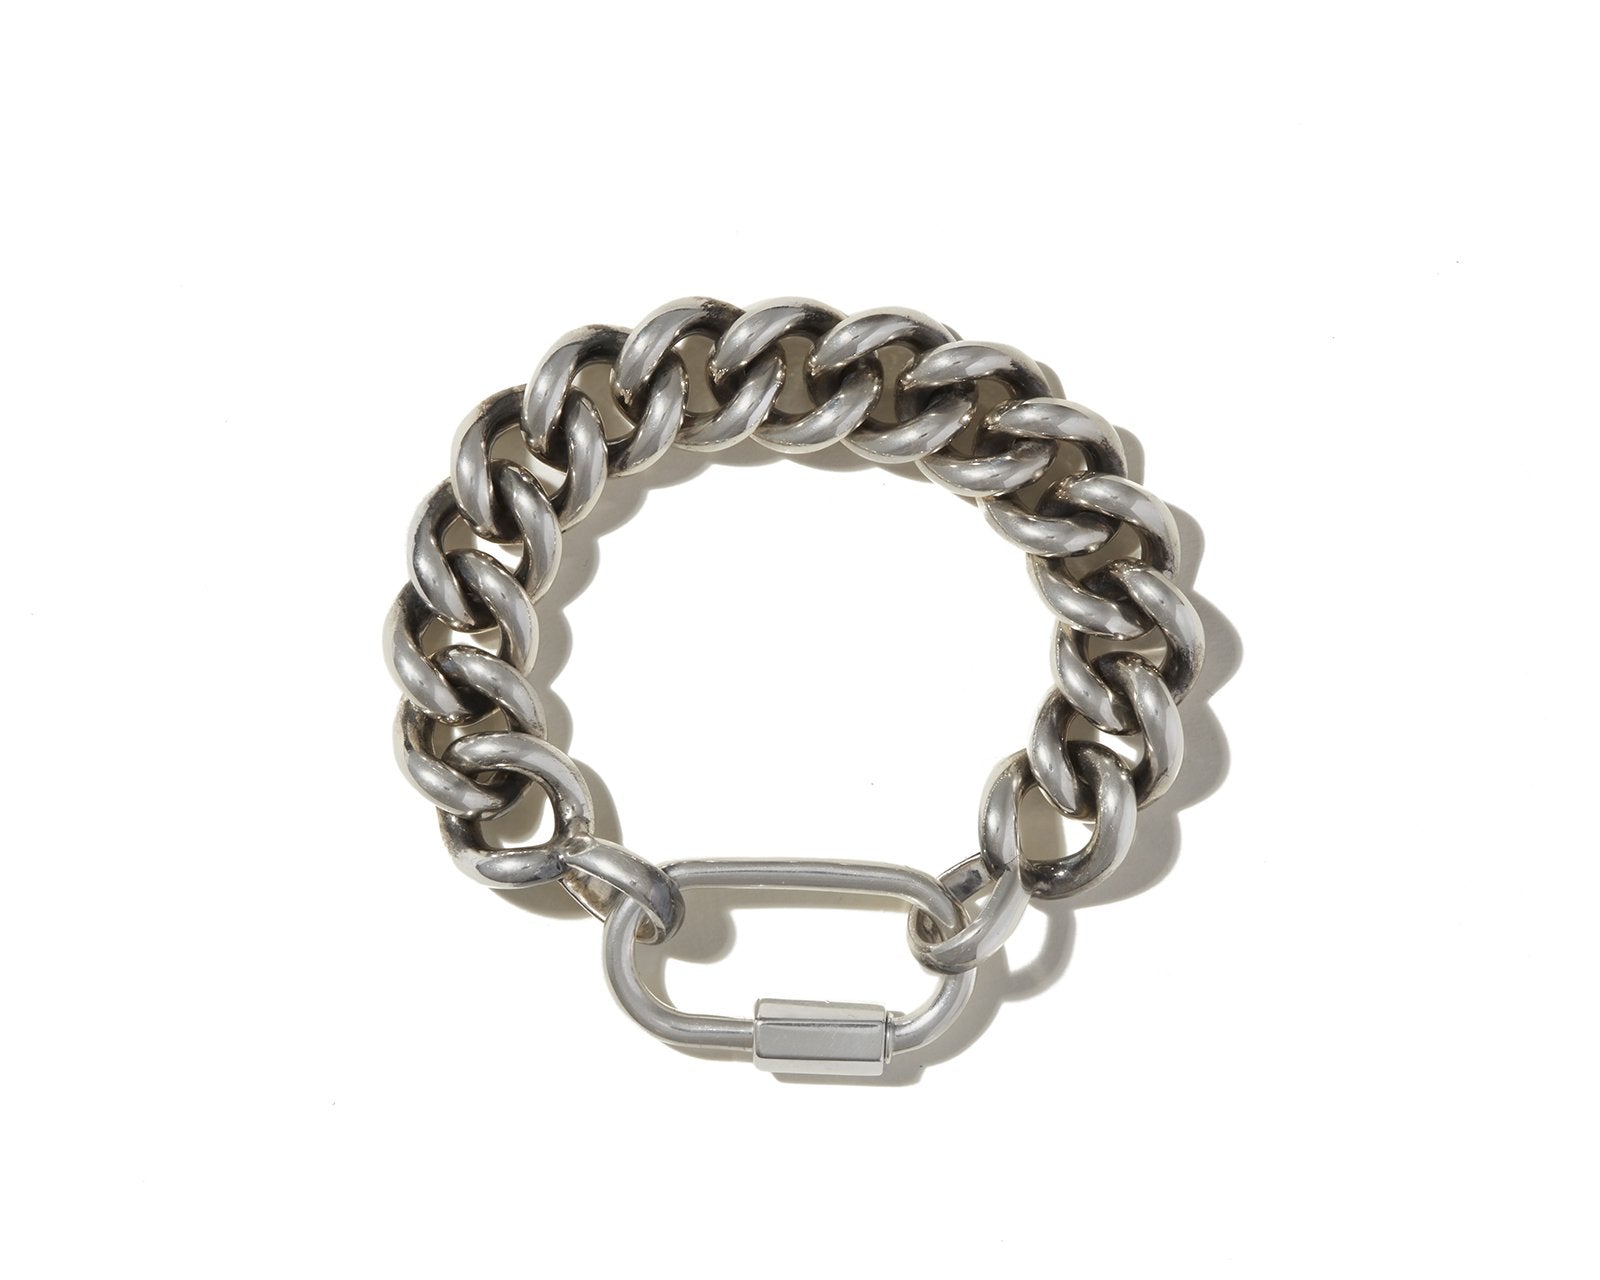 Chunky silver curb chain bracelet with silver lock charm